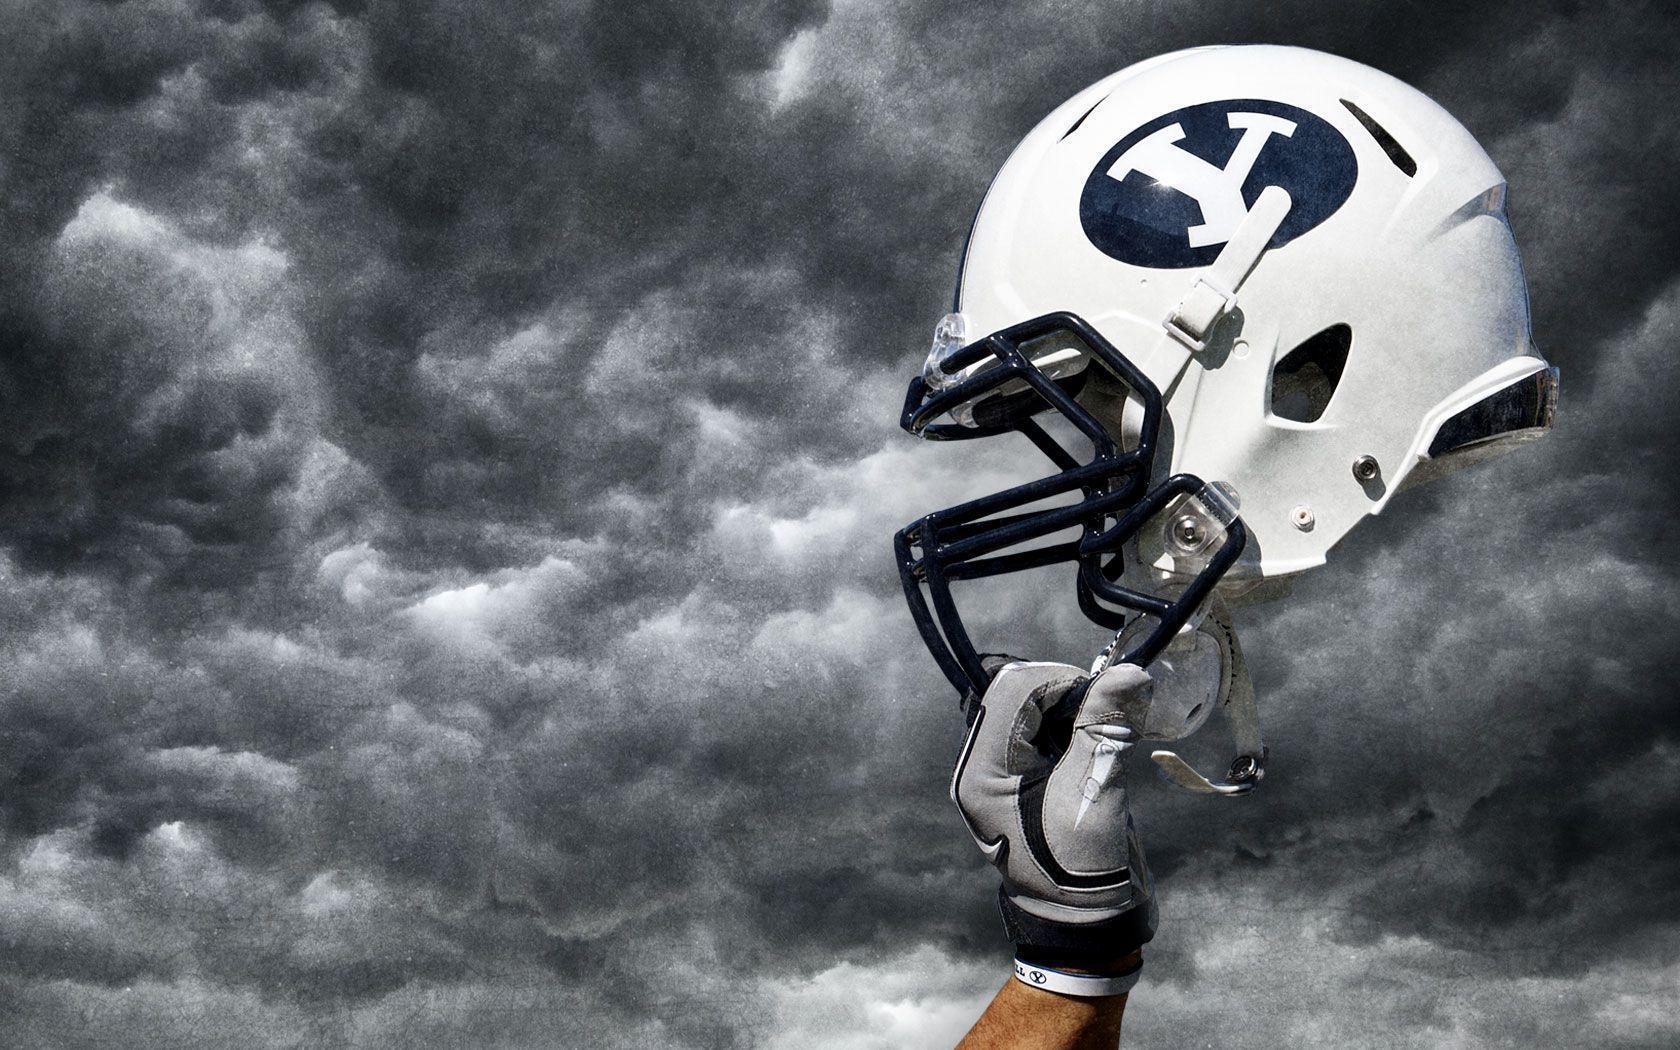 2017 Byu Football Schedule Backgrounds - Wallpaper Cave